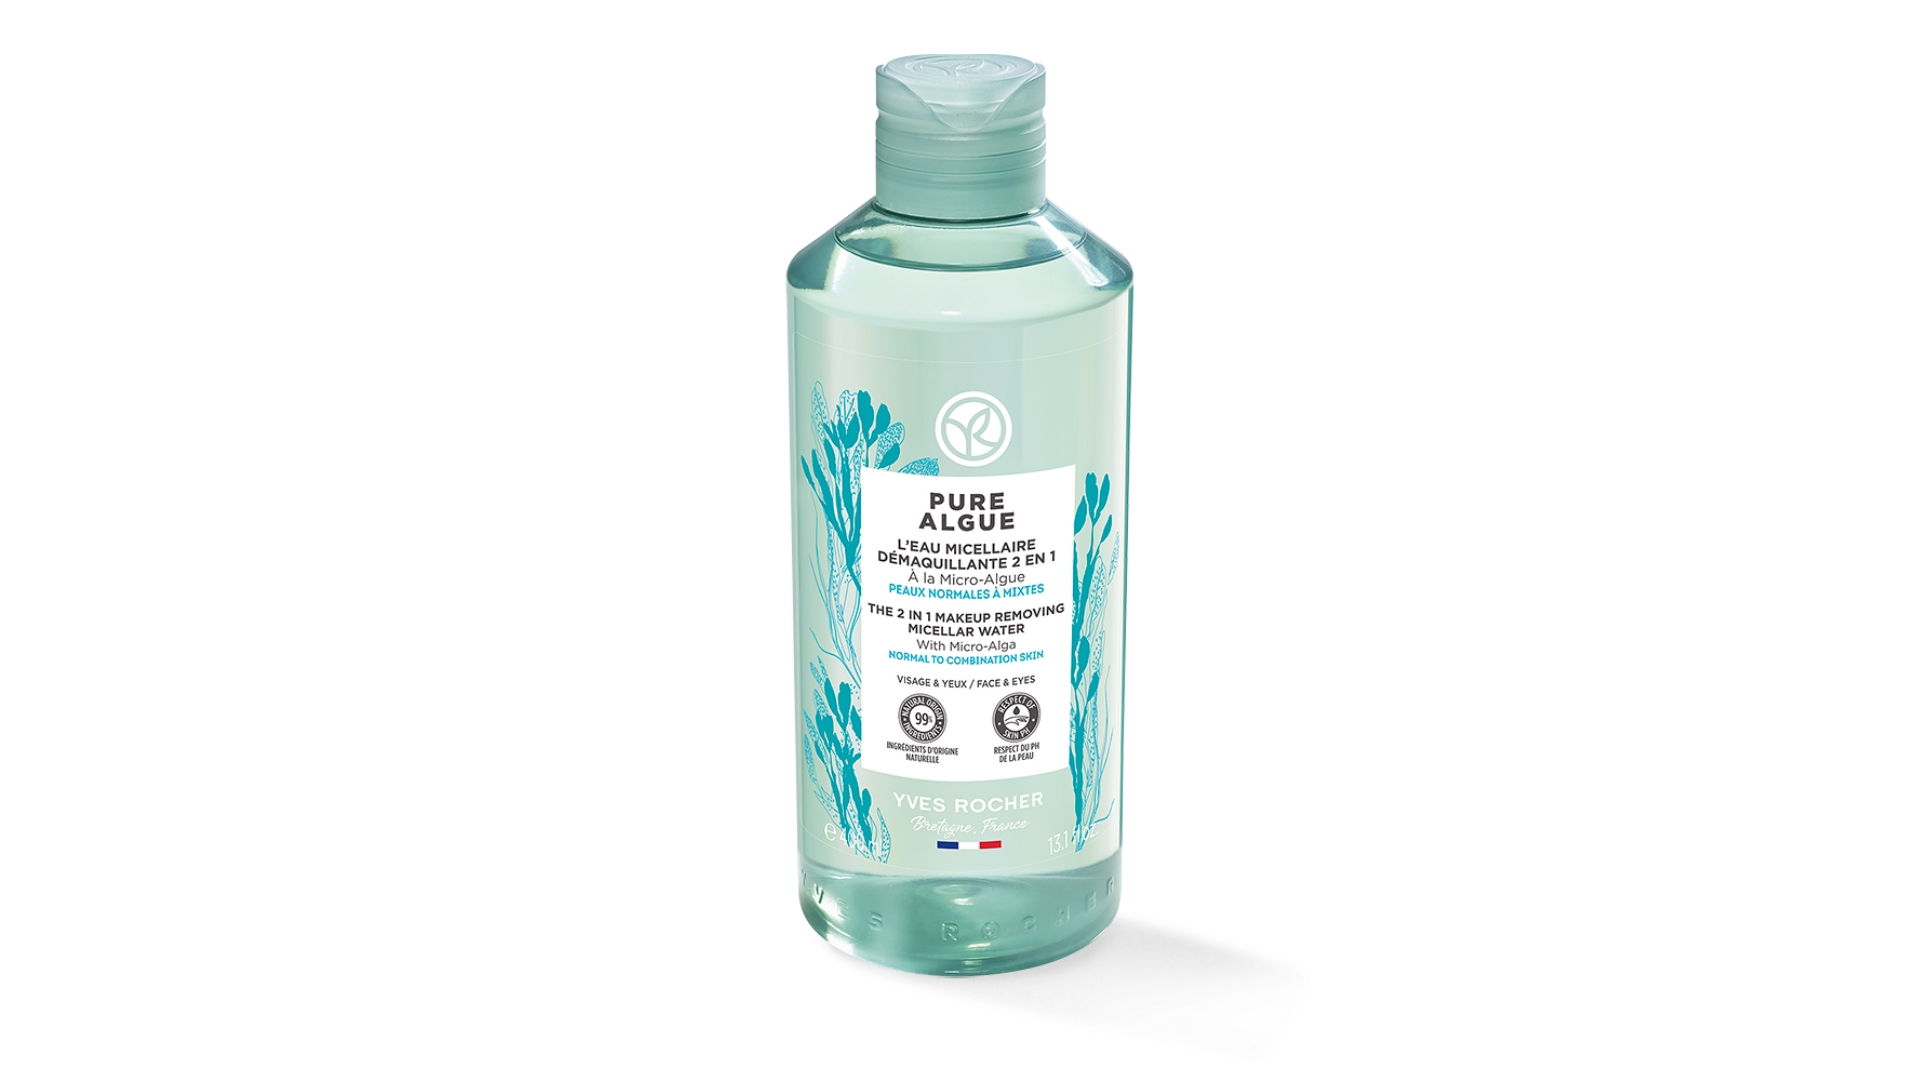 The 2 in 1 Makeup Removing Micellar Water Pure Algue - 400ml